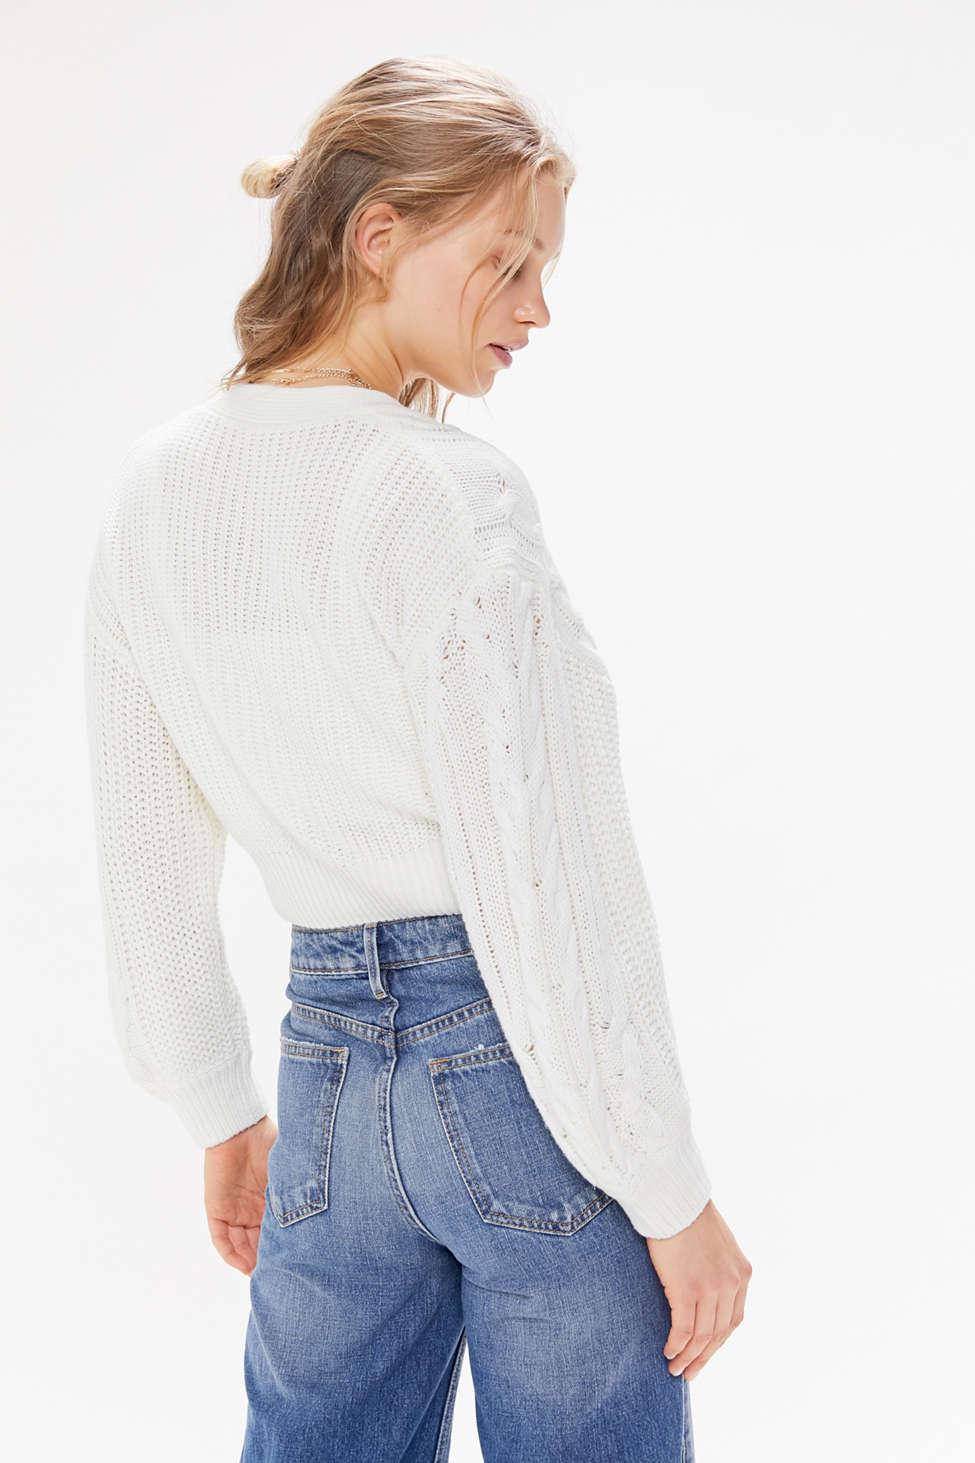 Urban Outfitters Uo Elena Cable Knit Cardigan Sweater in White | Lyst